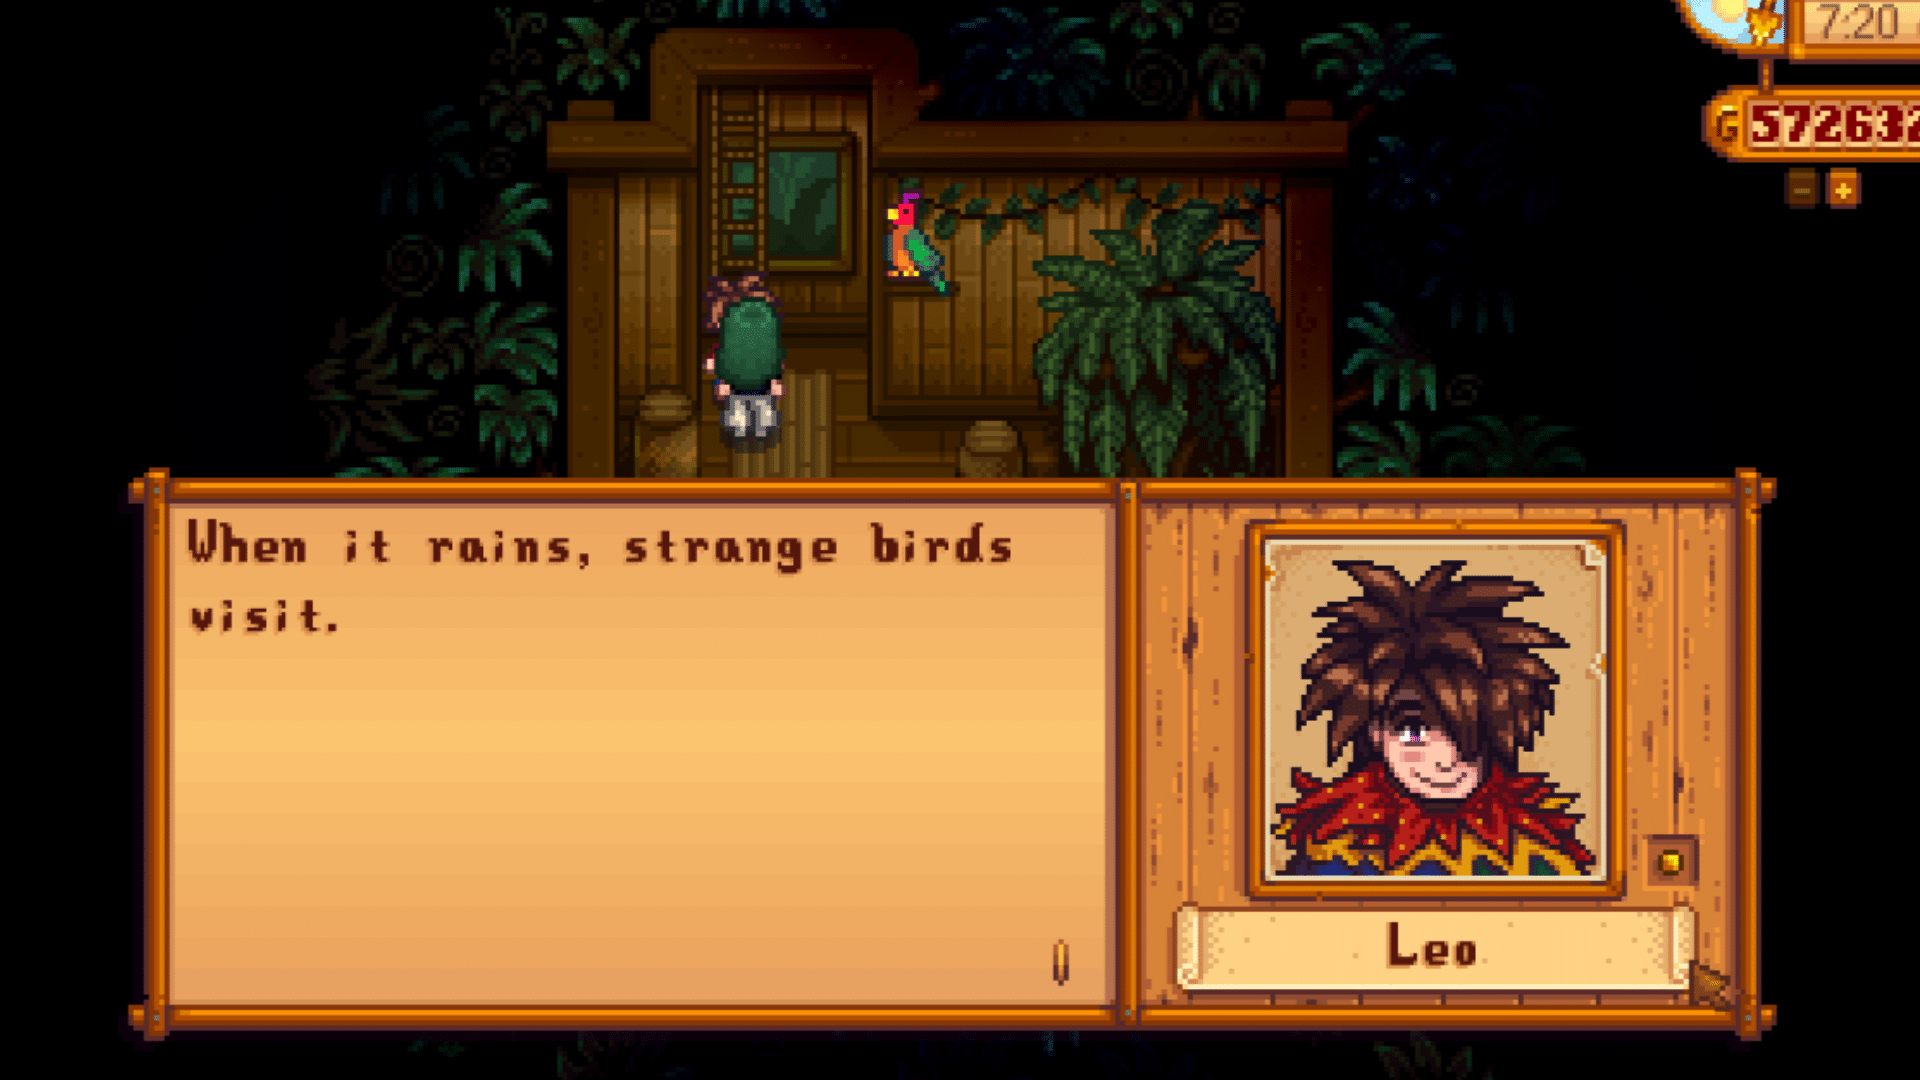 A player conversing with Leo in Stardew Valley.